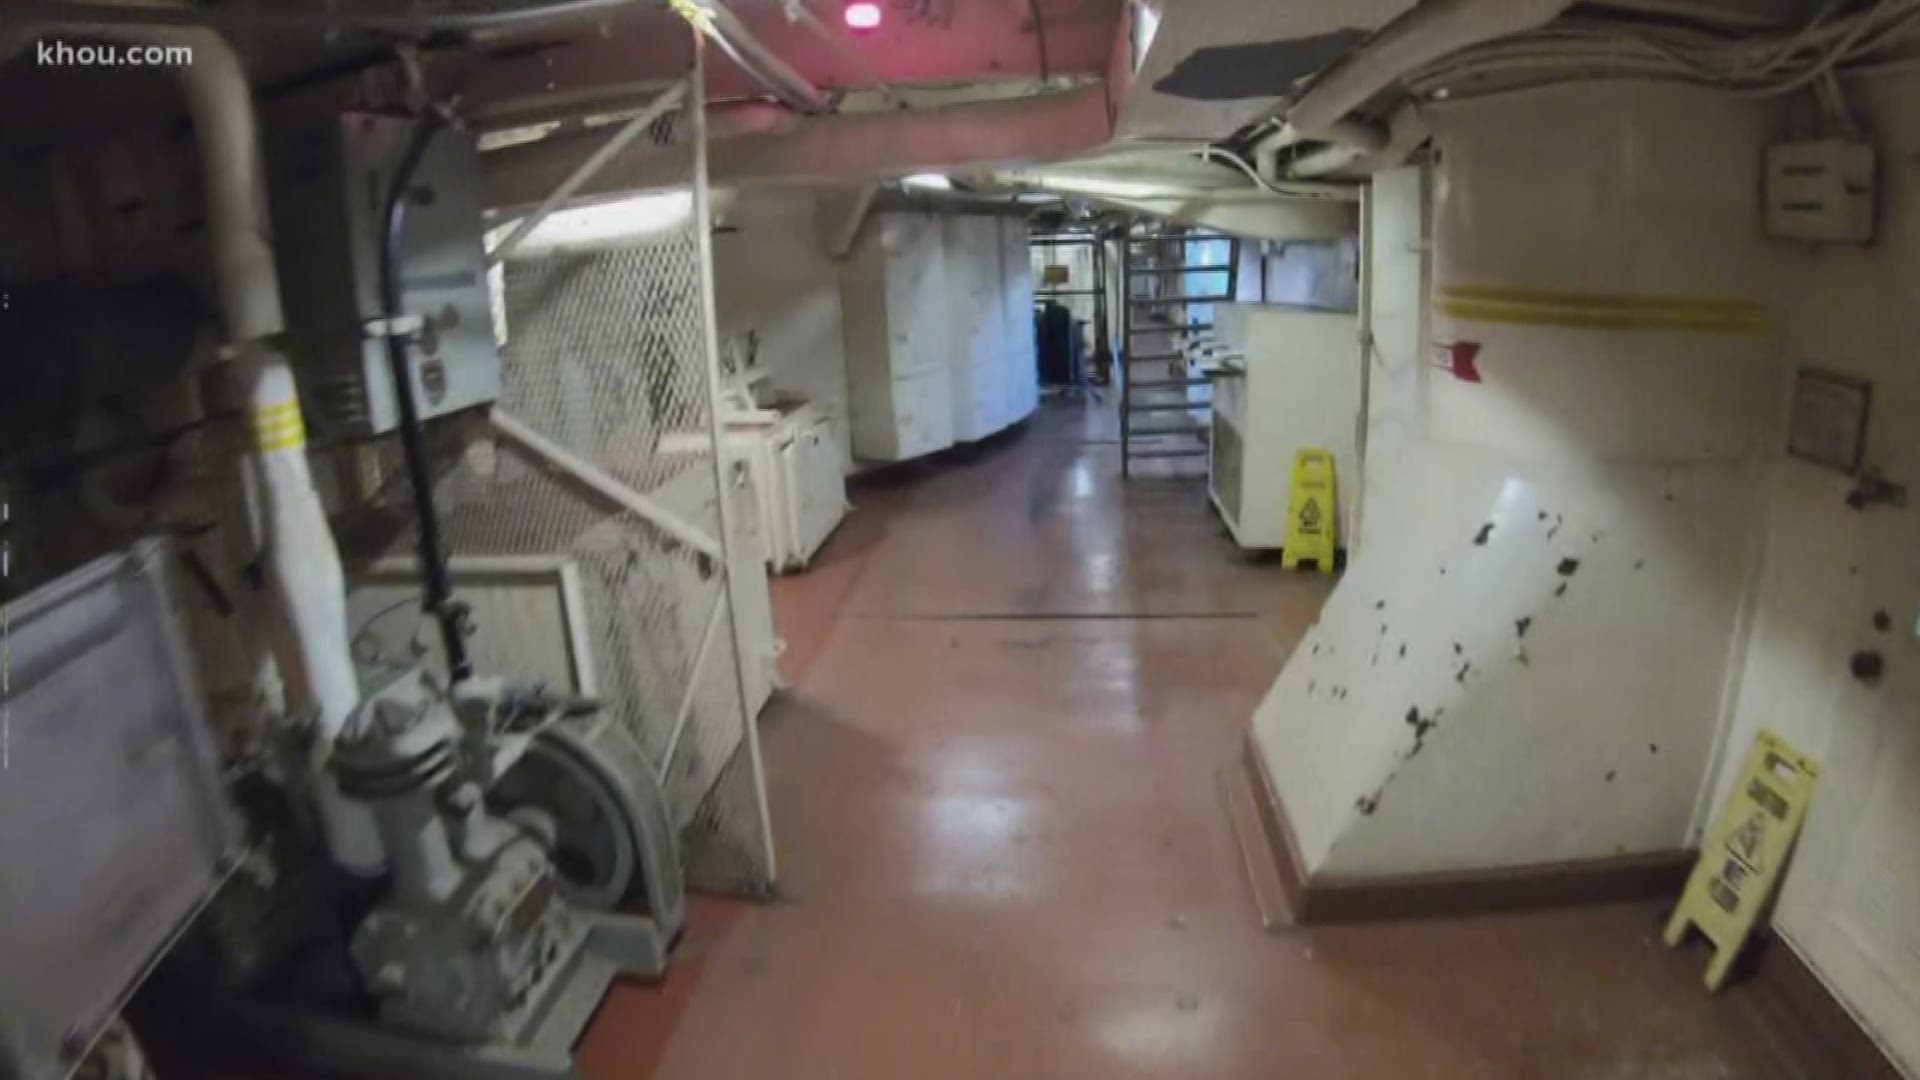 People now have the opportunity to sleep on board the former USS Texas and go hunting for ghosts.